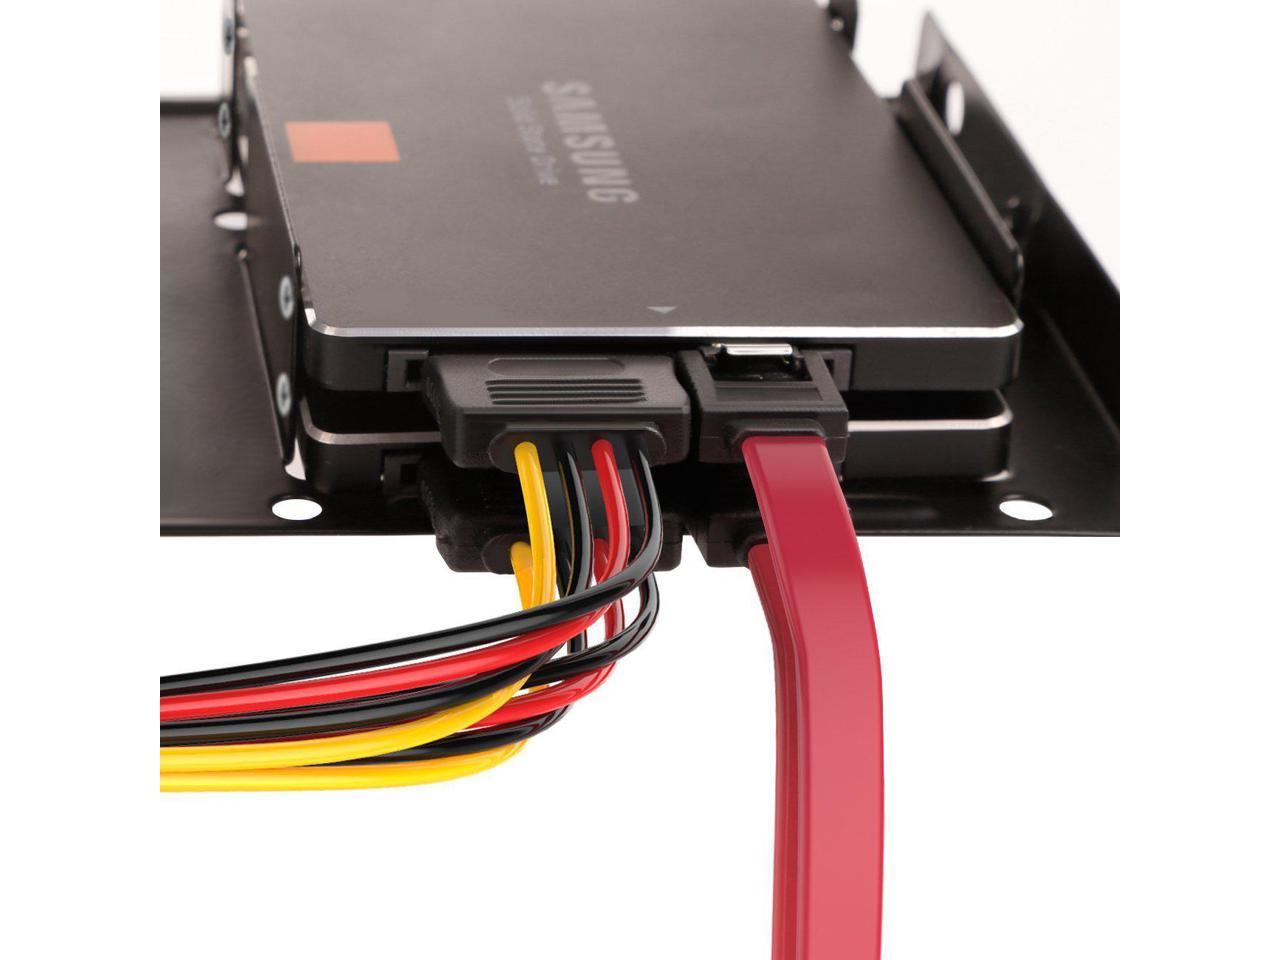 SSD SATA III Hard Drive Connection Cables 1 X 4 Pin To Dual 15 Pin